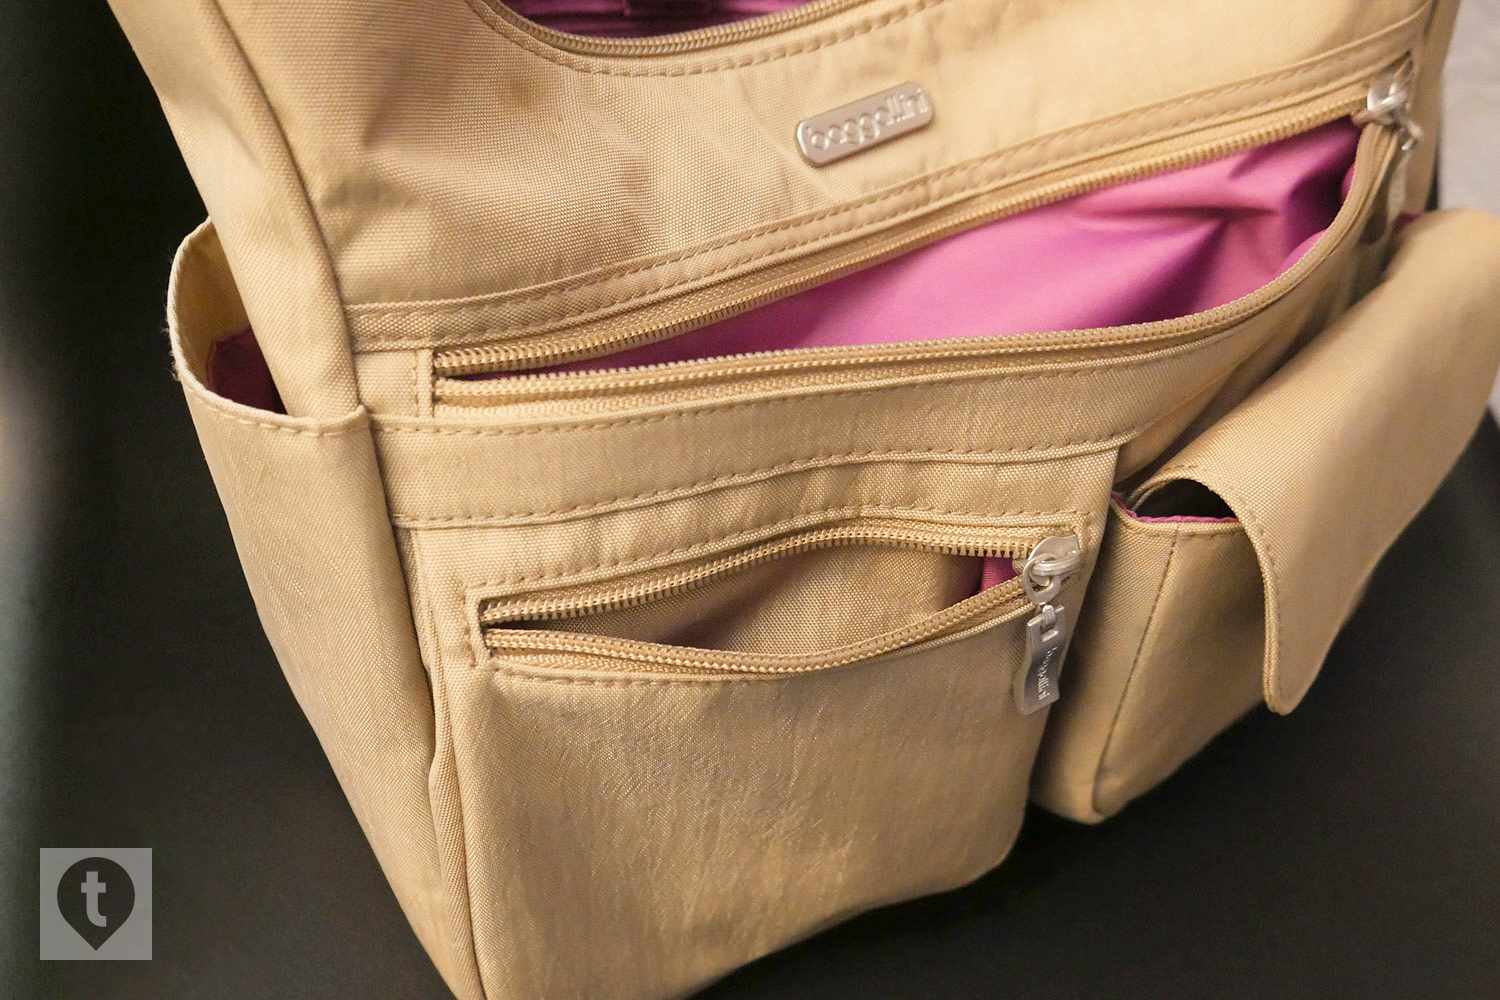 The Baggallini Everywhere Bag: Versatile Style for Any Adventure - Get USA Services